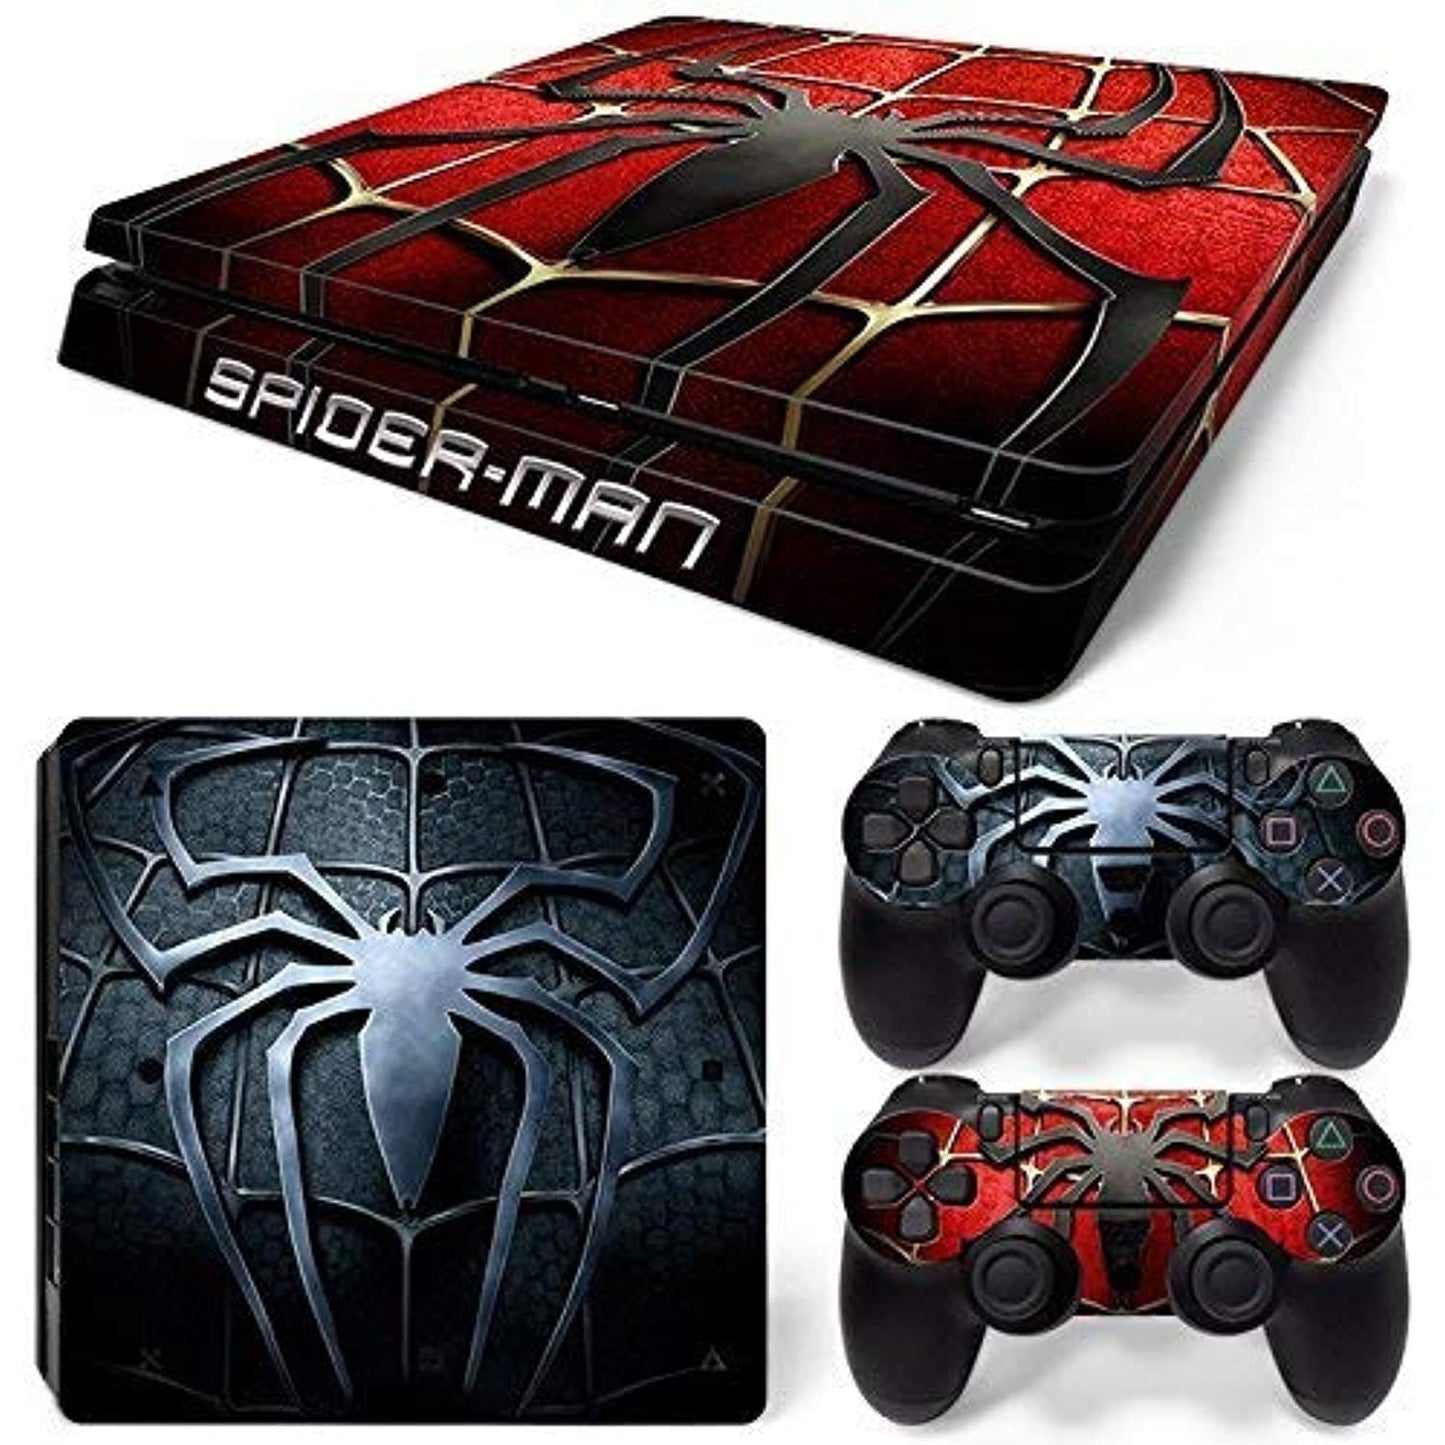 Spider-Man3 Theme 3M Skin Sticker Cover for PS4 Slim Console and Controllers